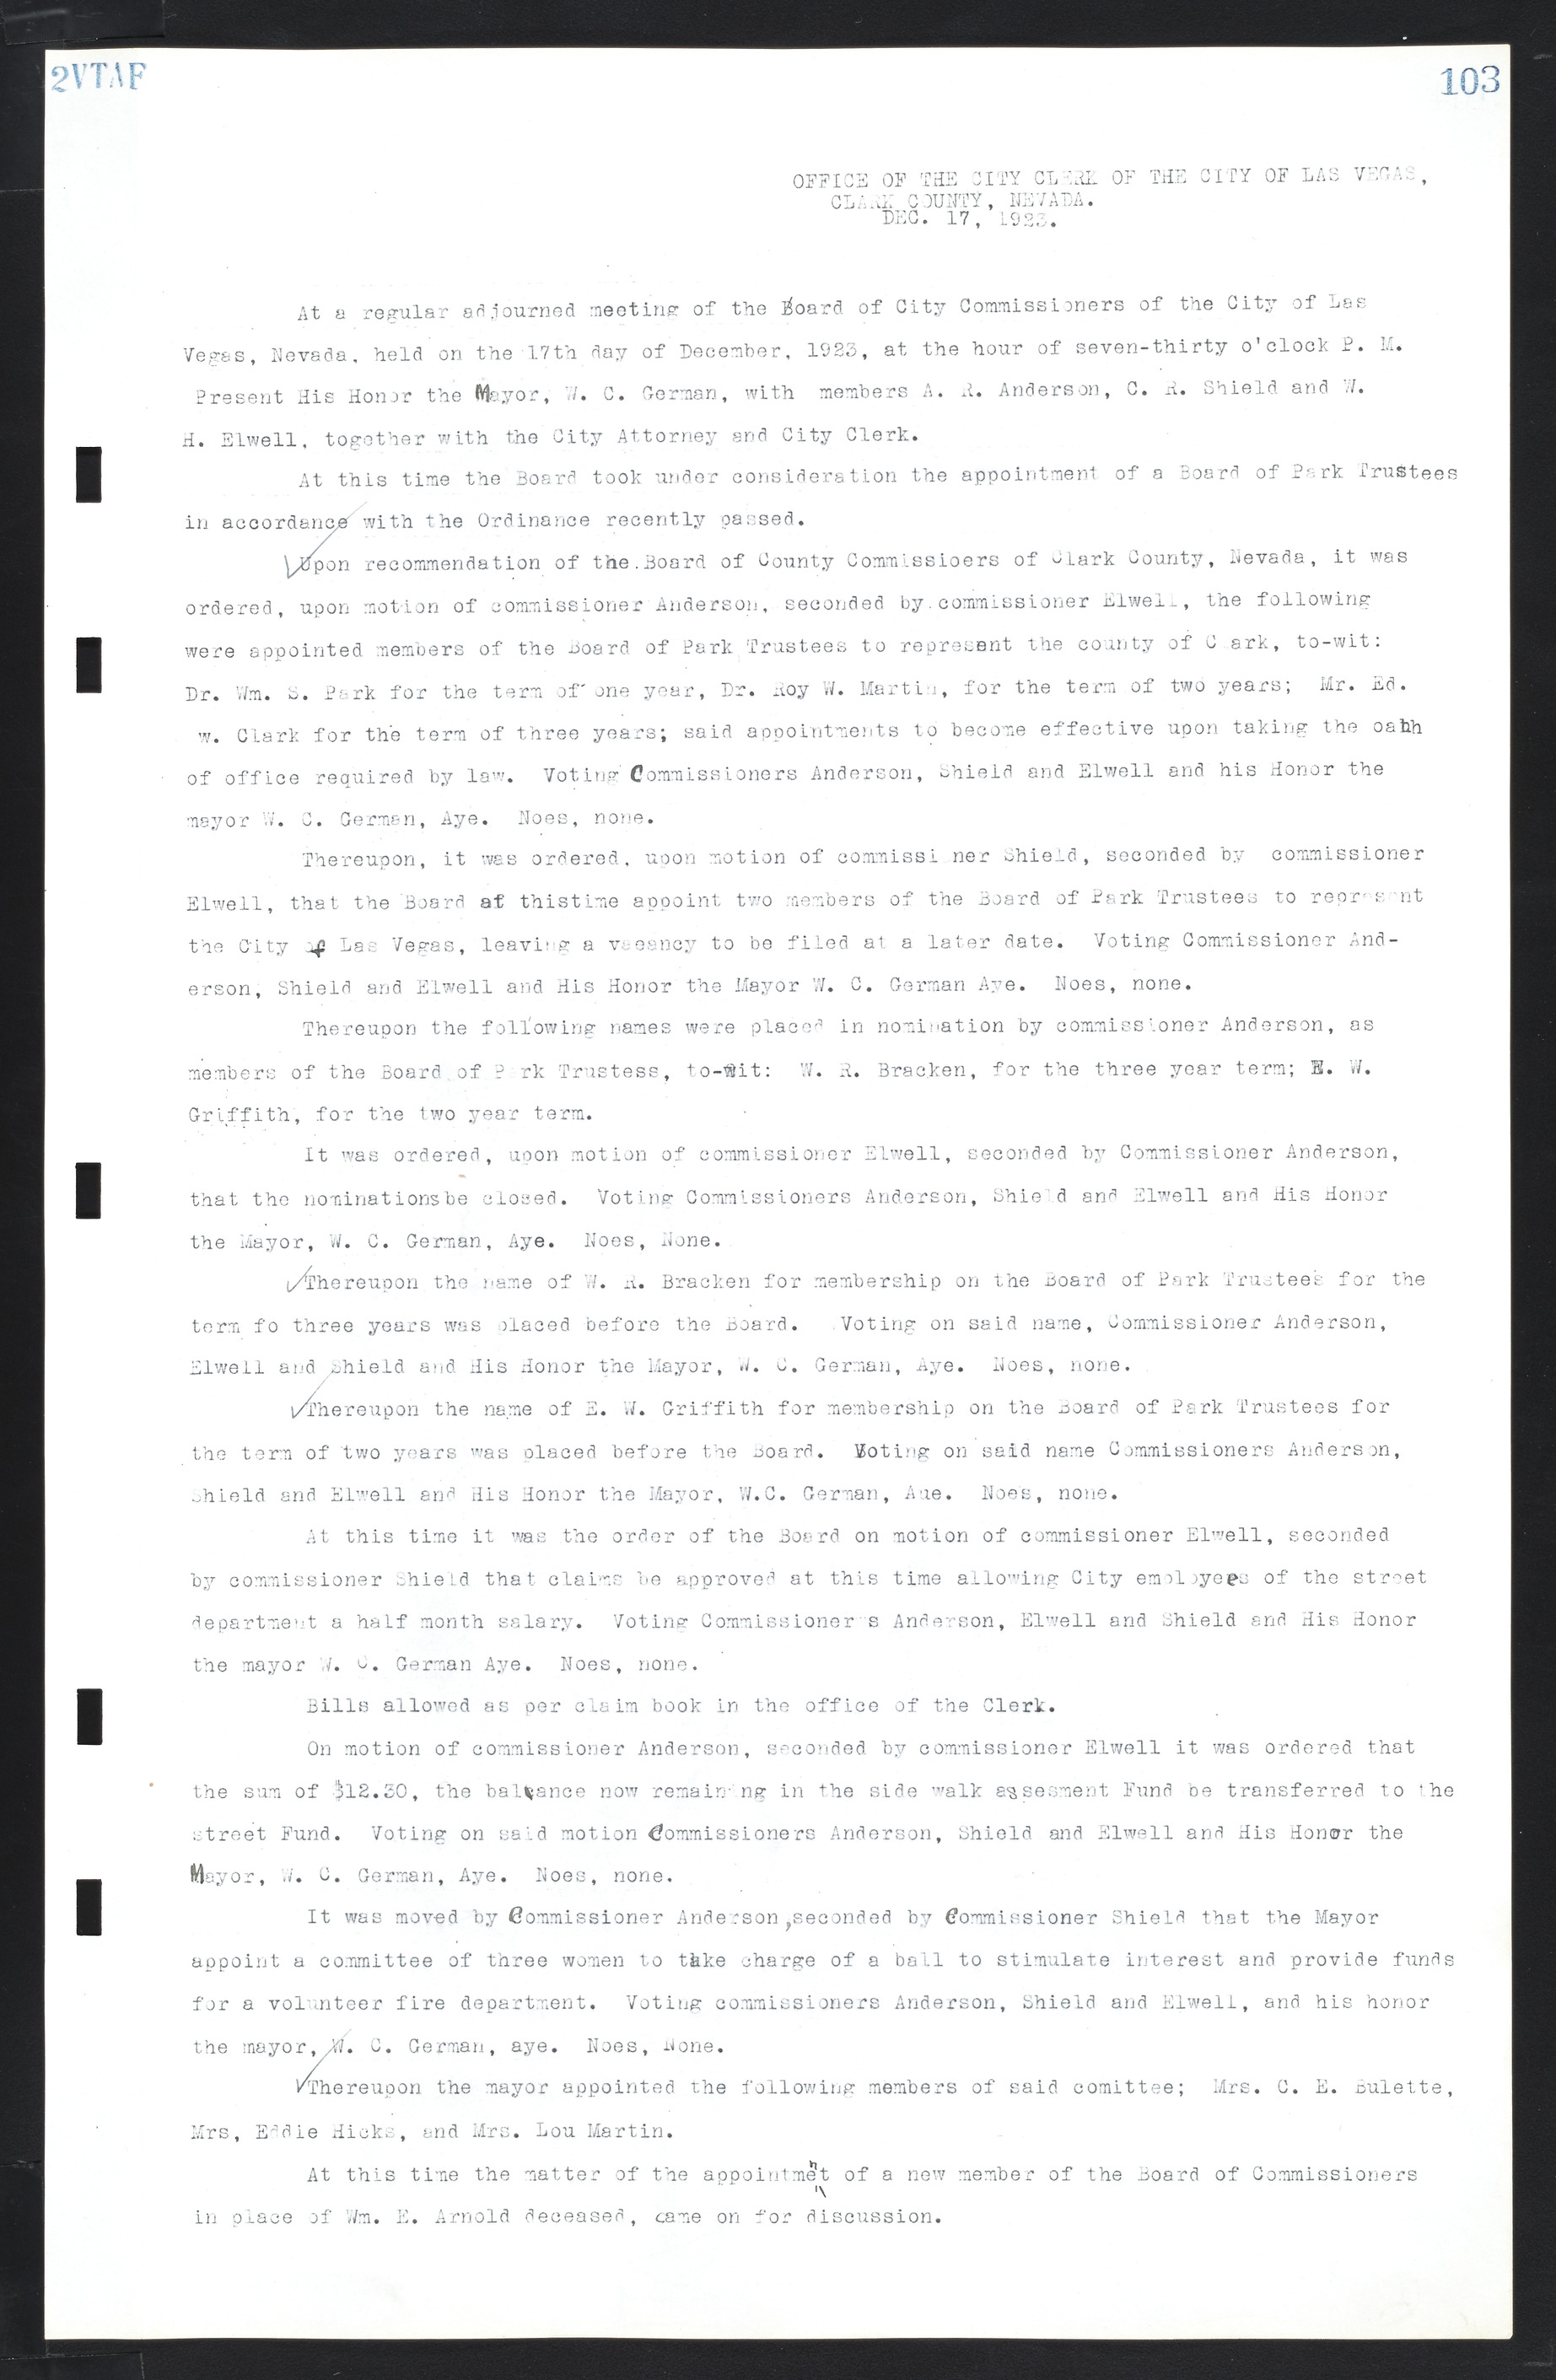 Las Vegas City Commission Minutes, March 1, 1922 to May 10, 1929, lvc000002-110